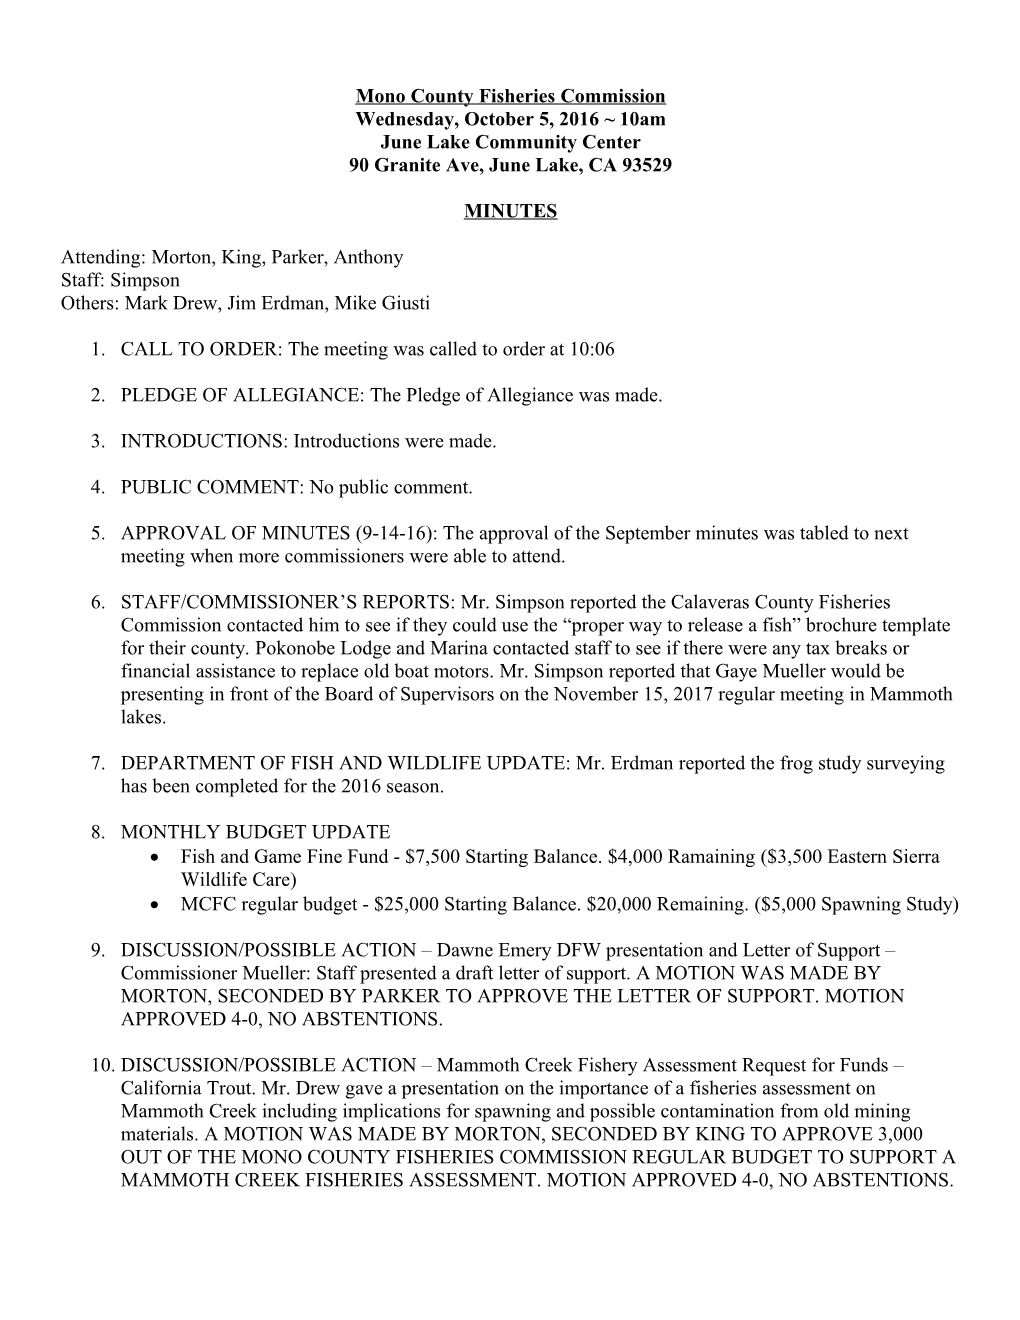 Mono County Fisheries Commission s1